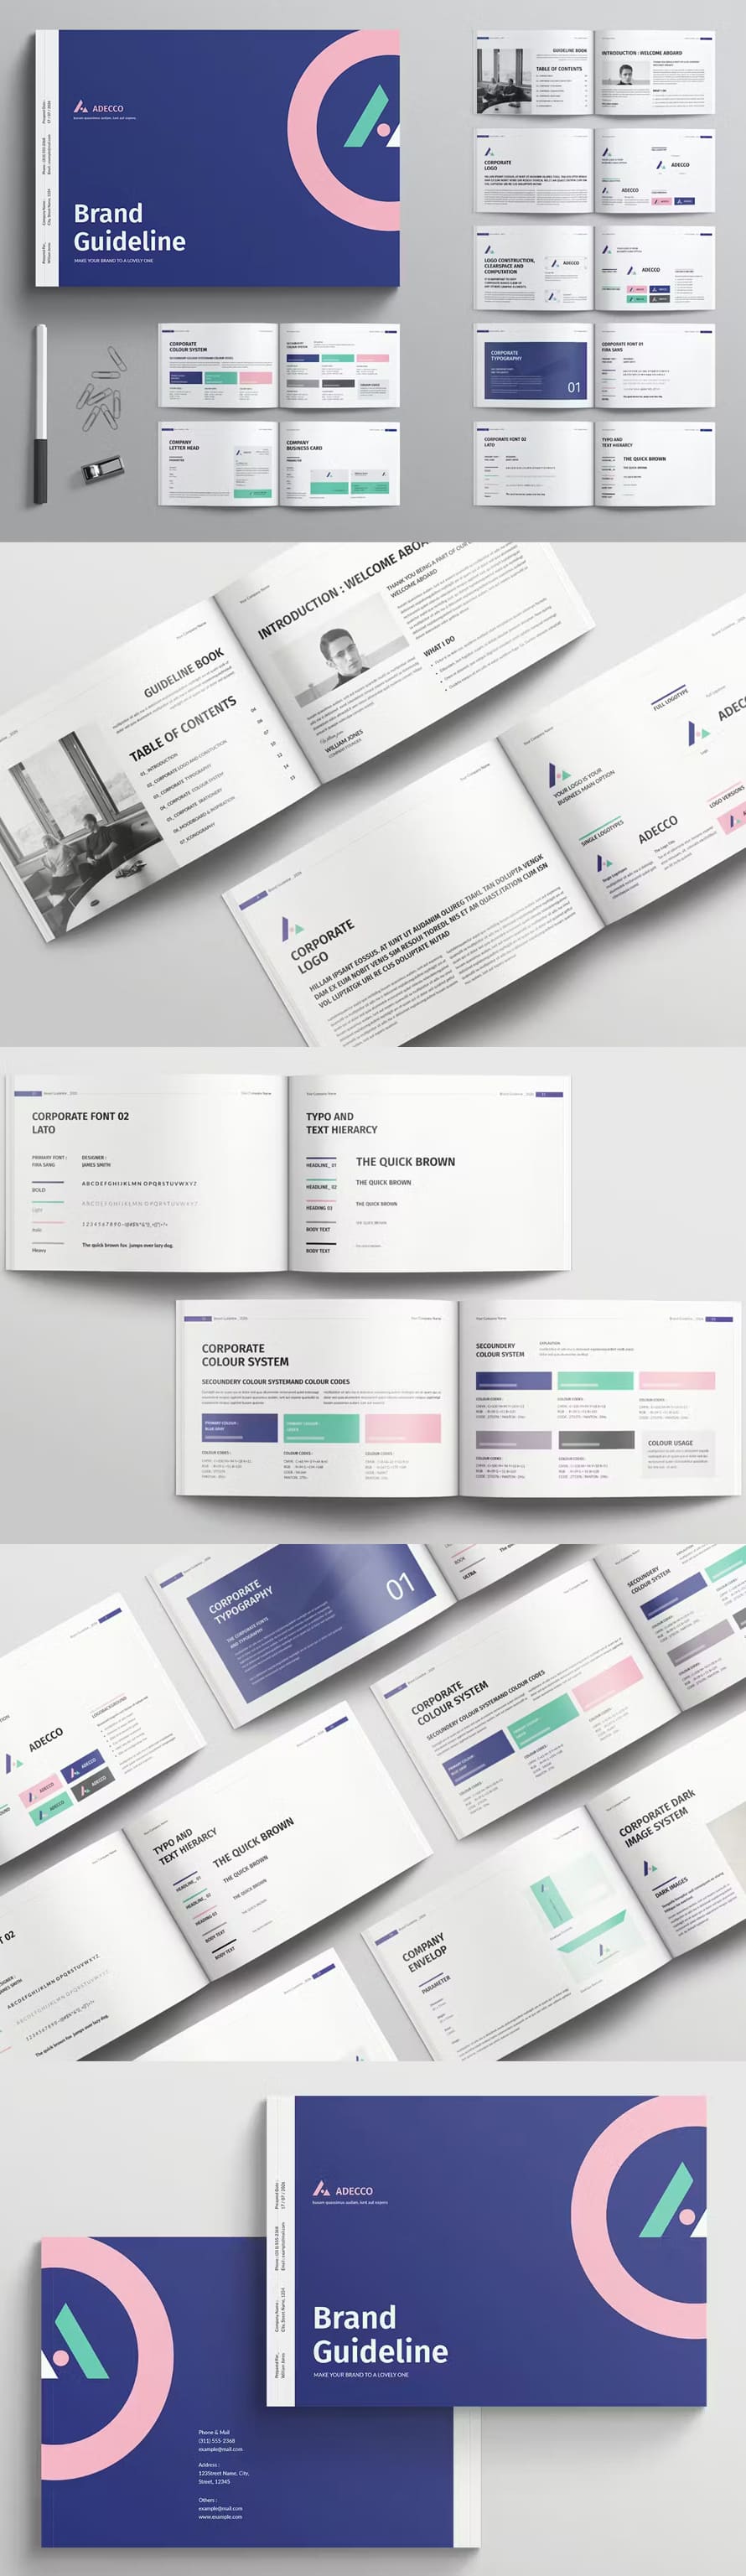 Creative Brand Guidelines Template